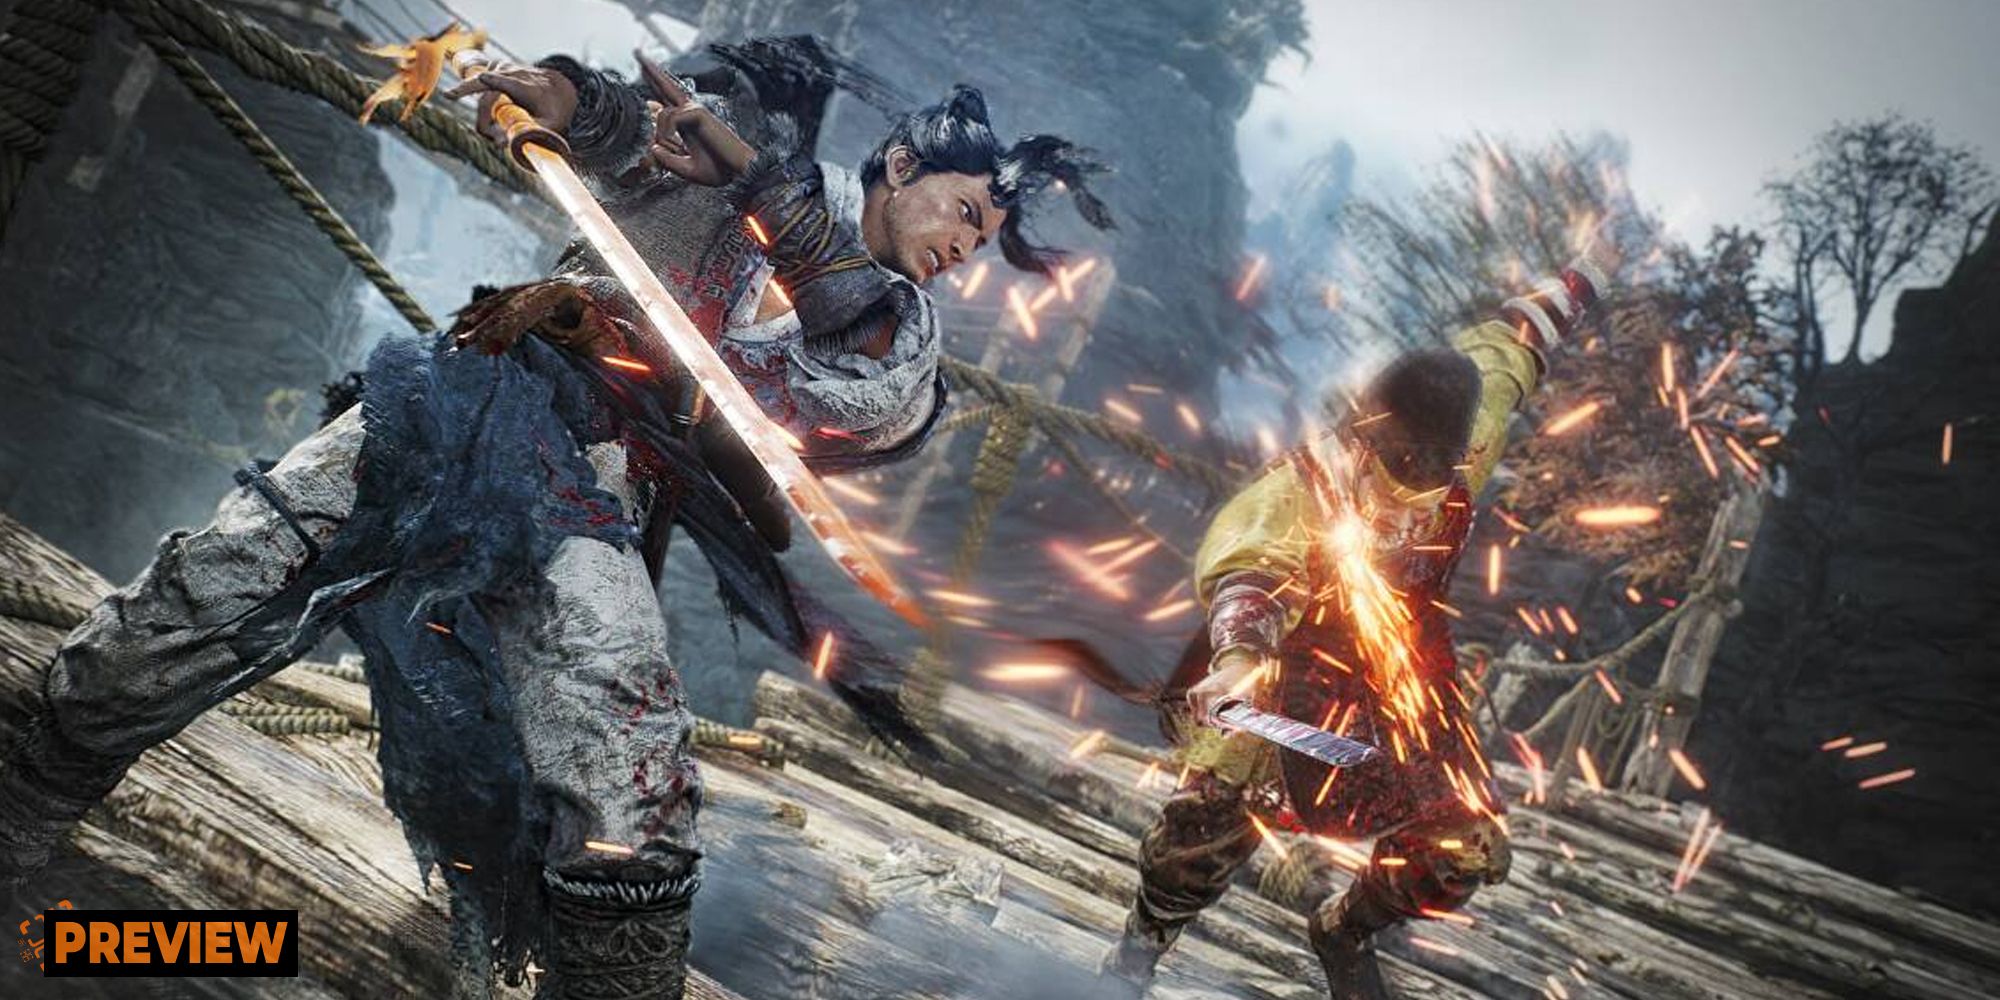 the protagonist of wo long deflecting a sword from an enemy, sparks fly